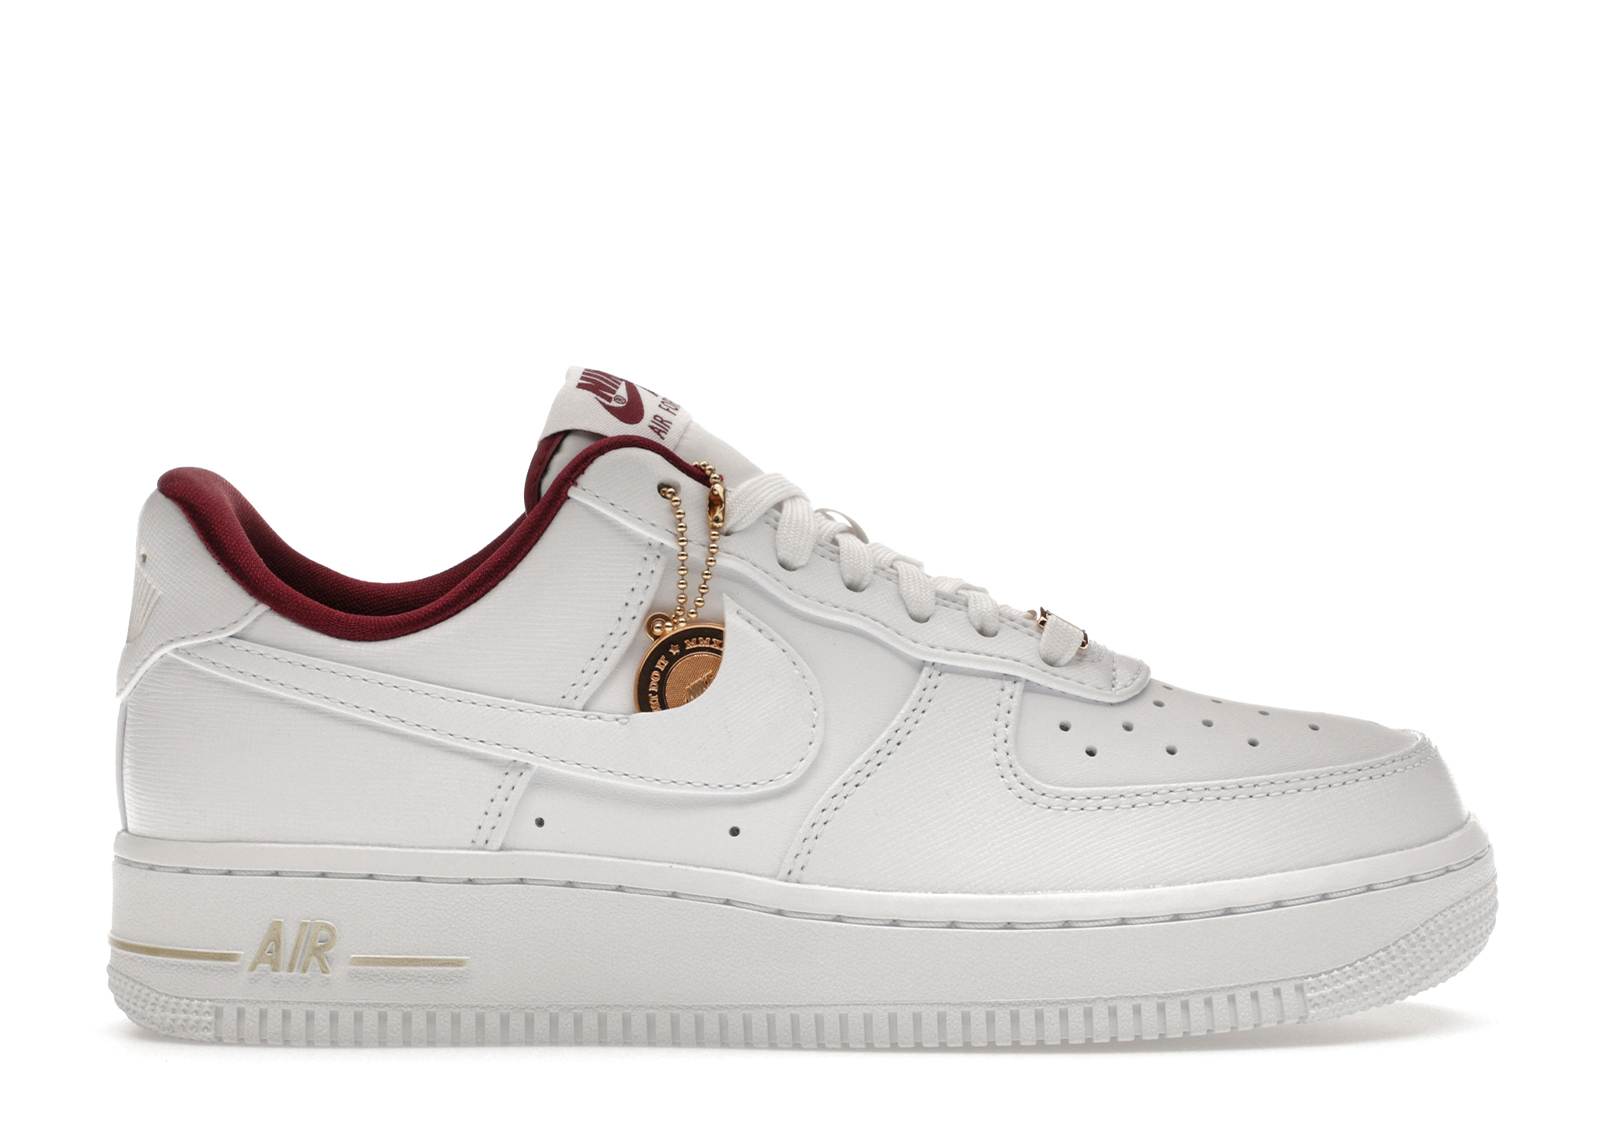 NIKE AIR FORCE 1 LOW 07 Just Do It 23.5サイズ